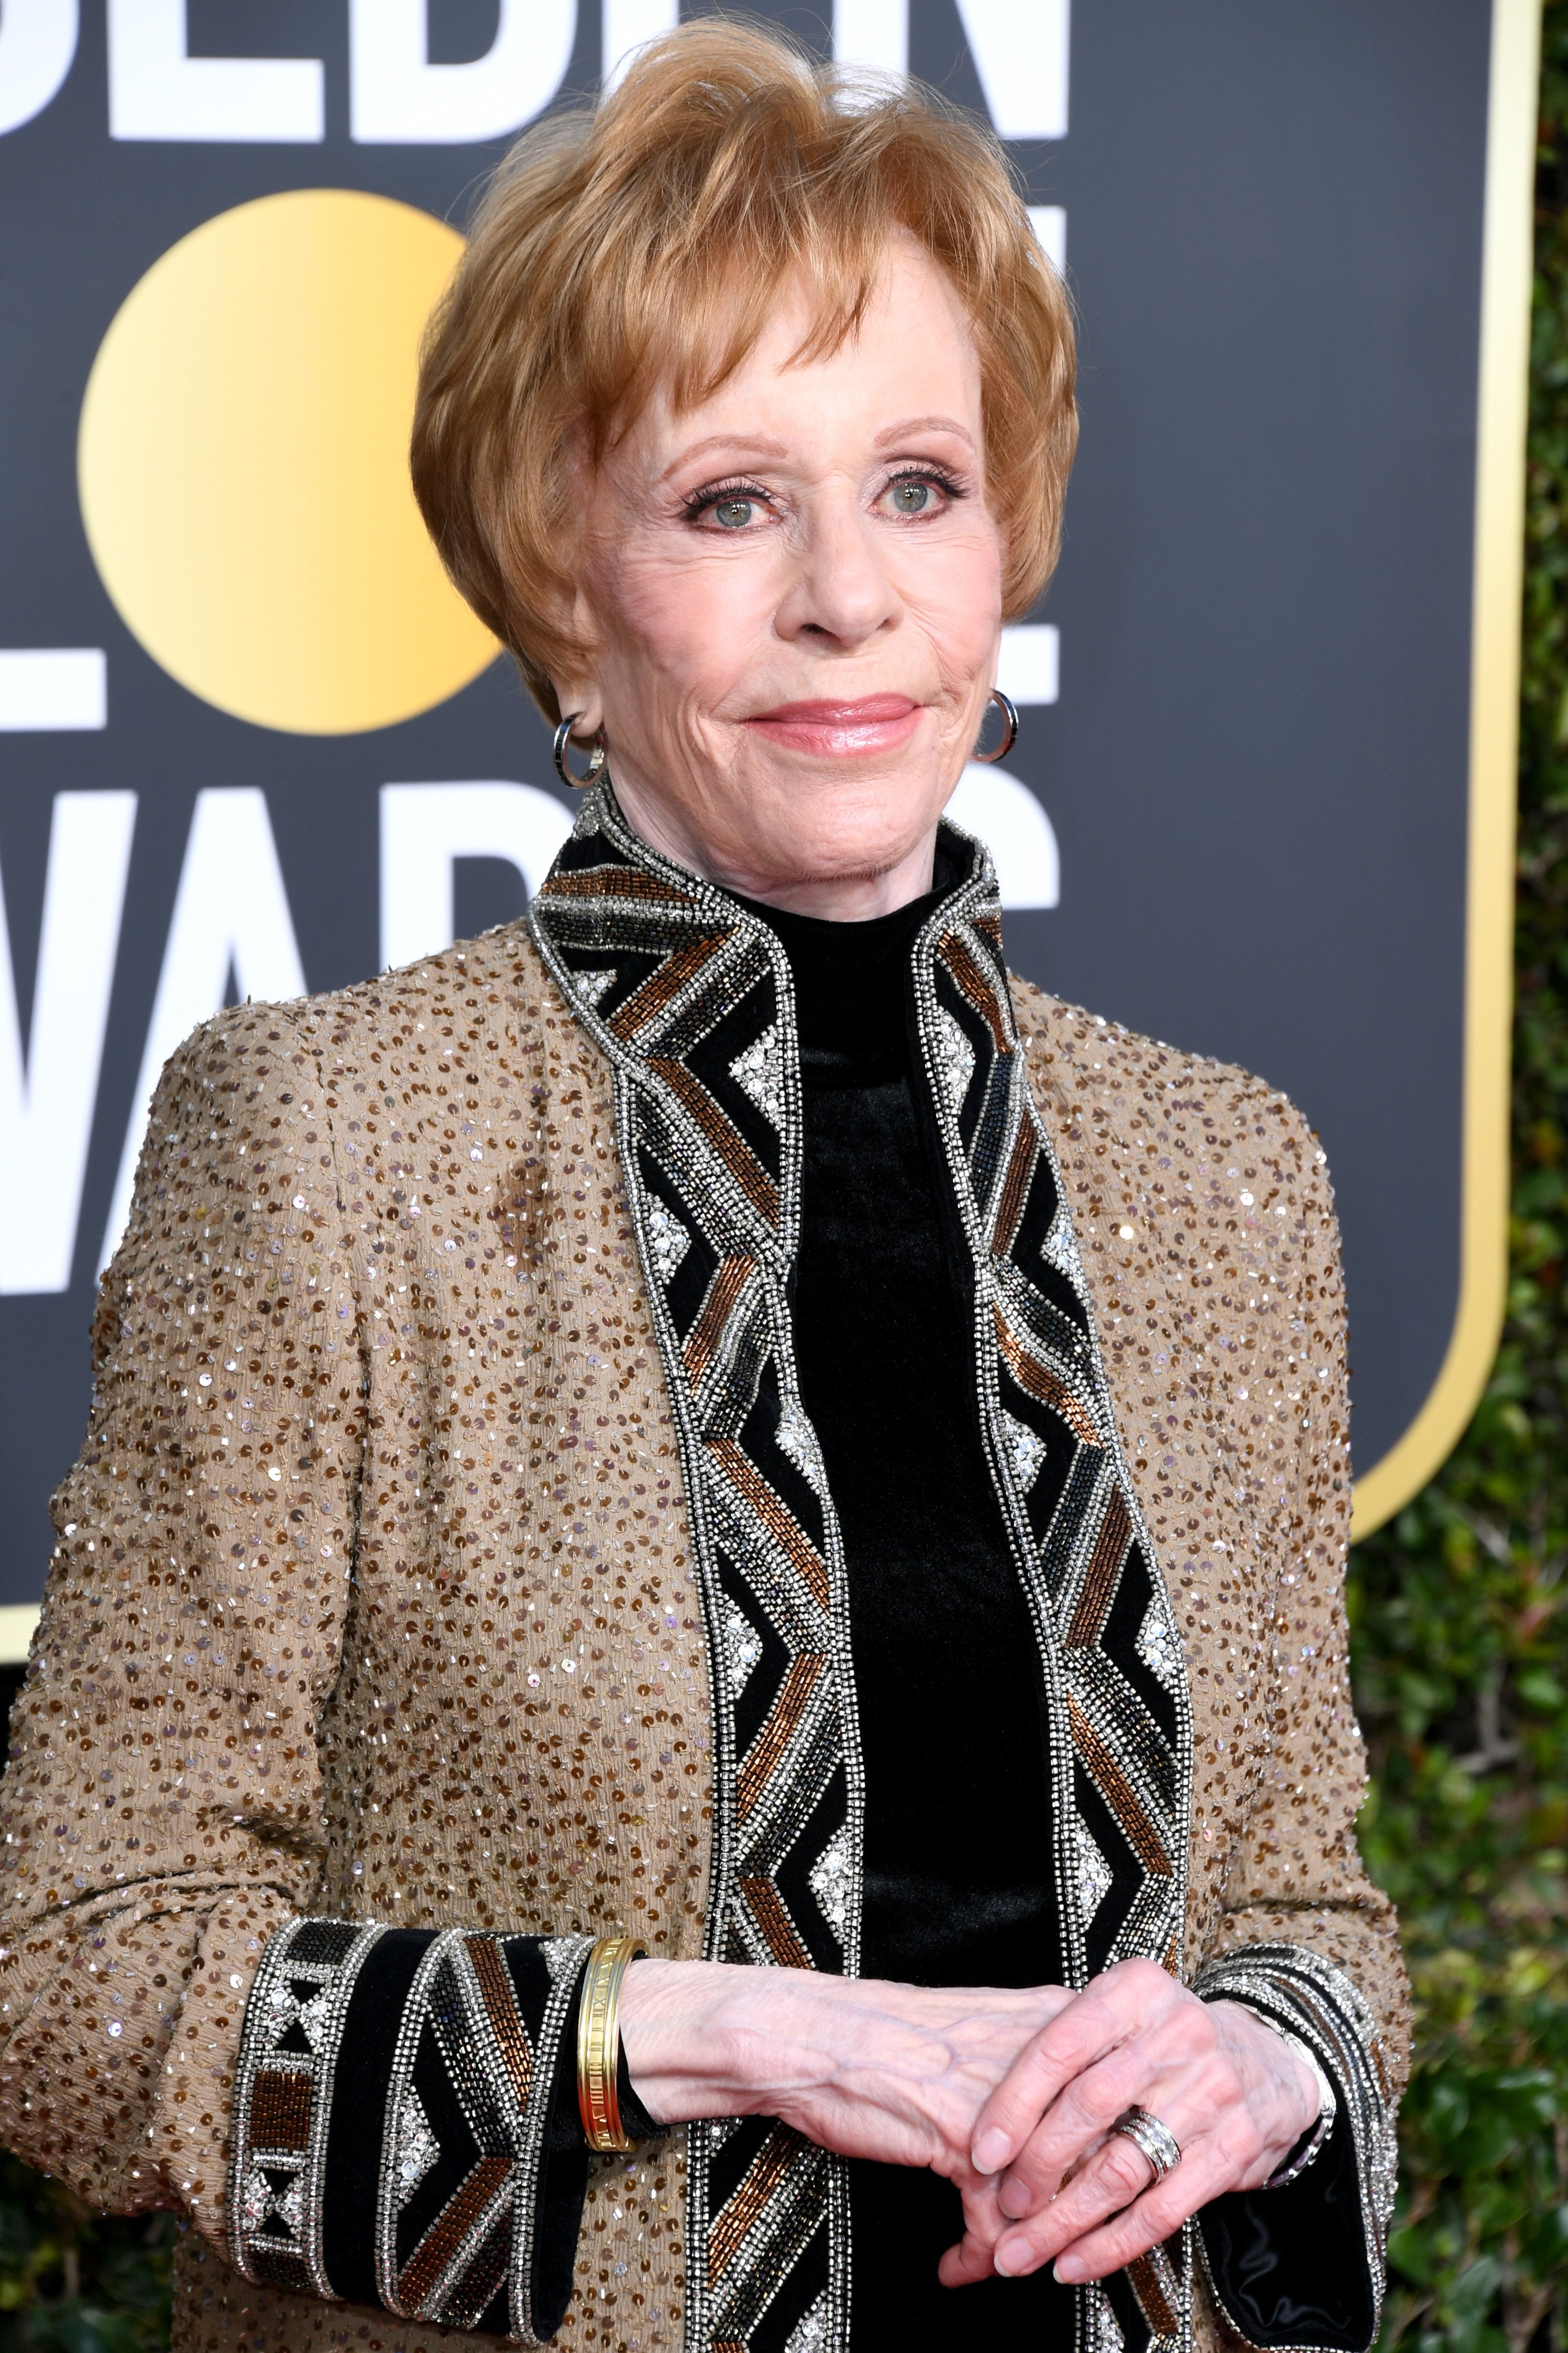 Carol Burnett attends the 76th Annual Golden Globe Awards on January 6, 2019, in Beverly Hills, California. | Source: Getty Images.